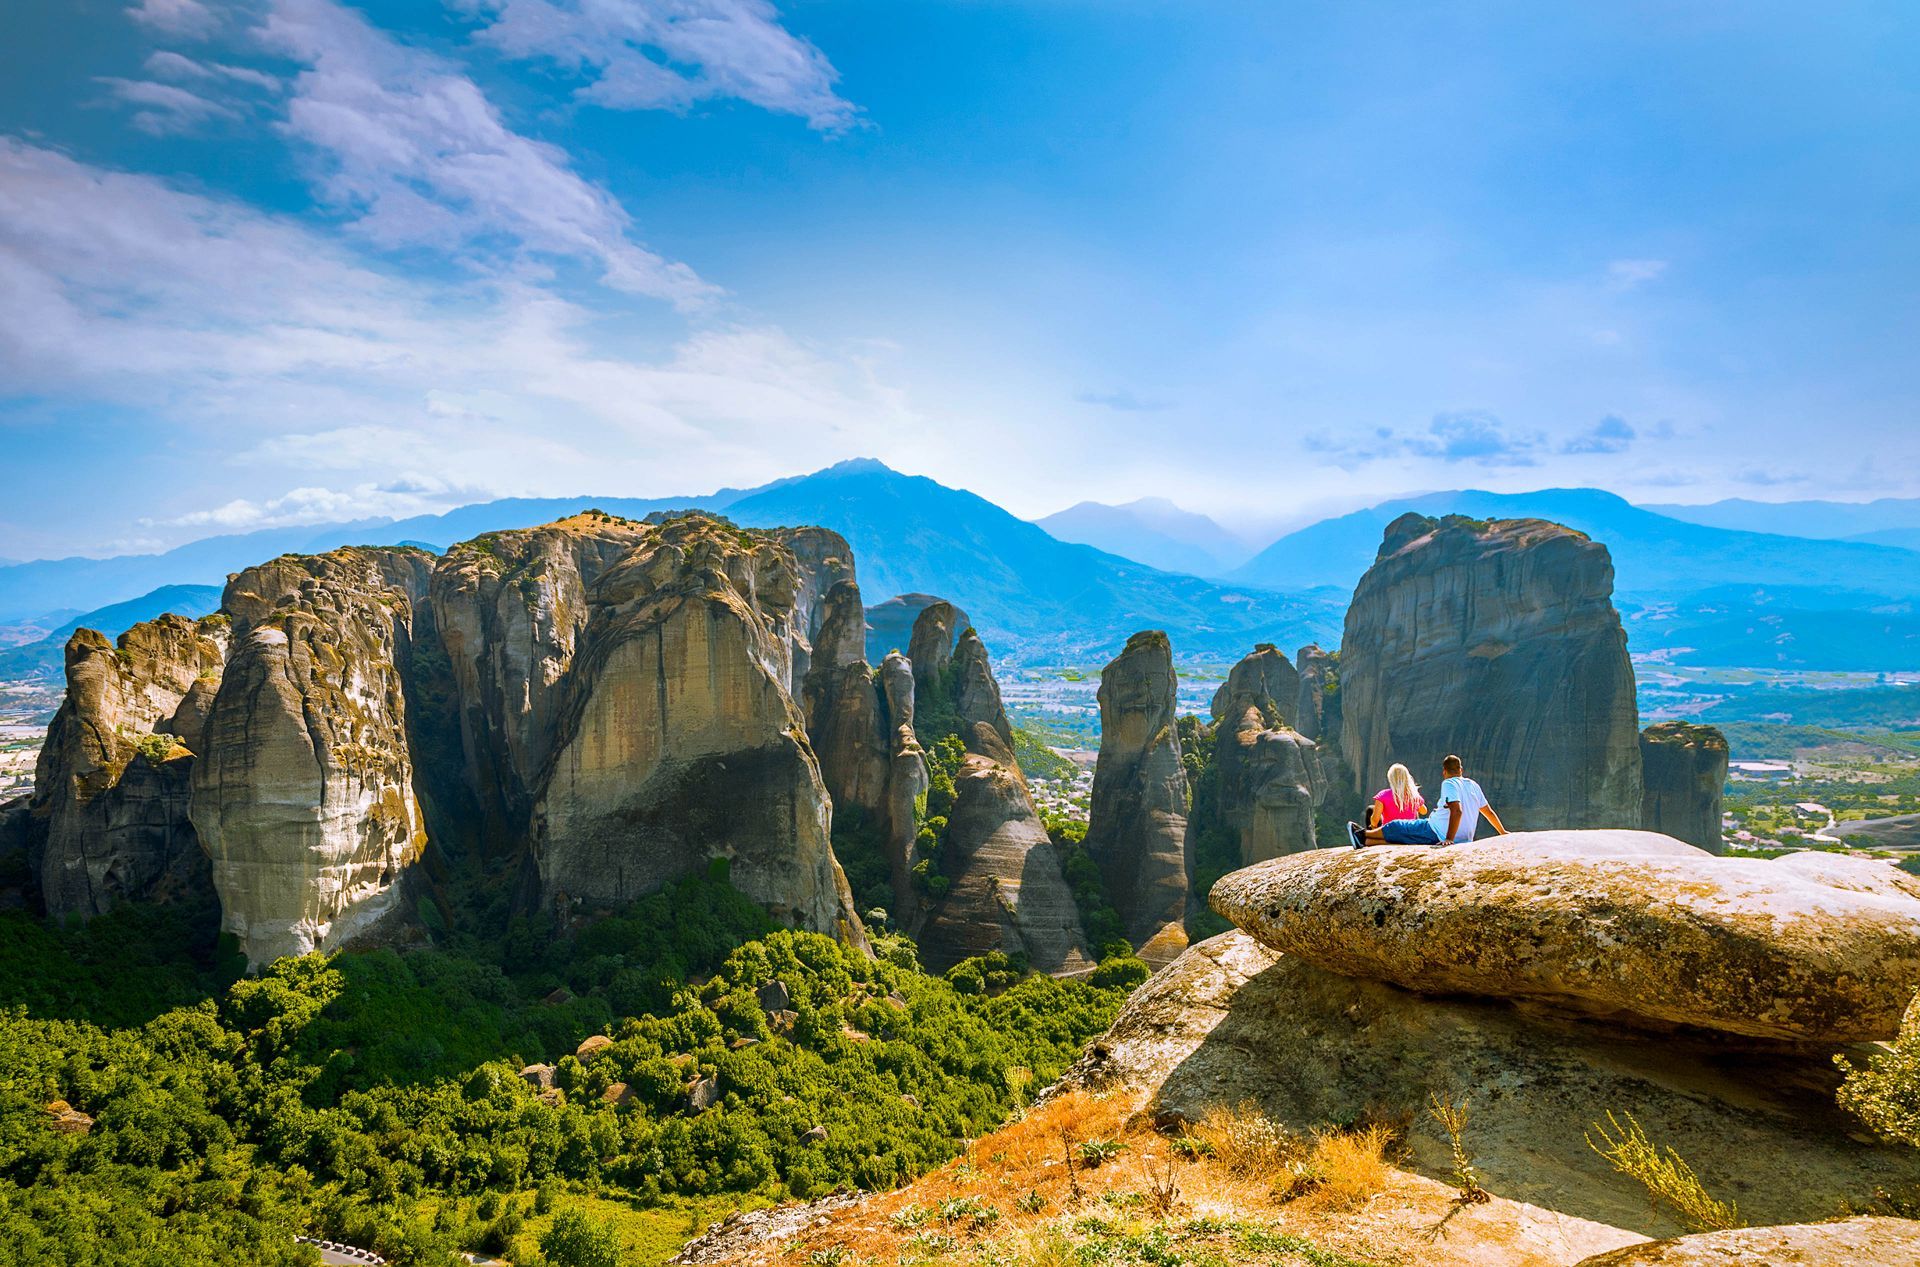 Meteora Greece: The impressibe rock formations